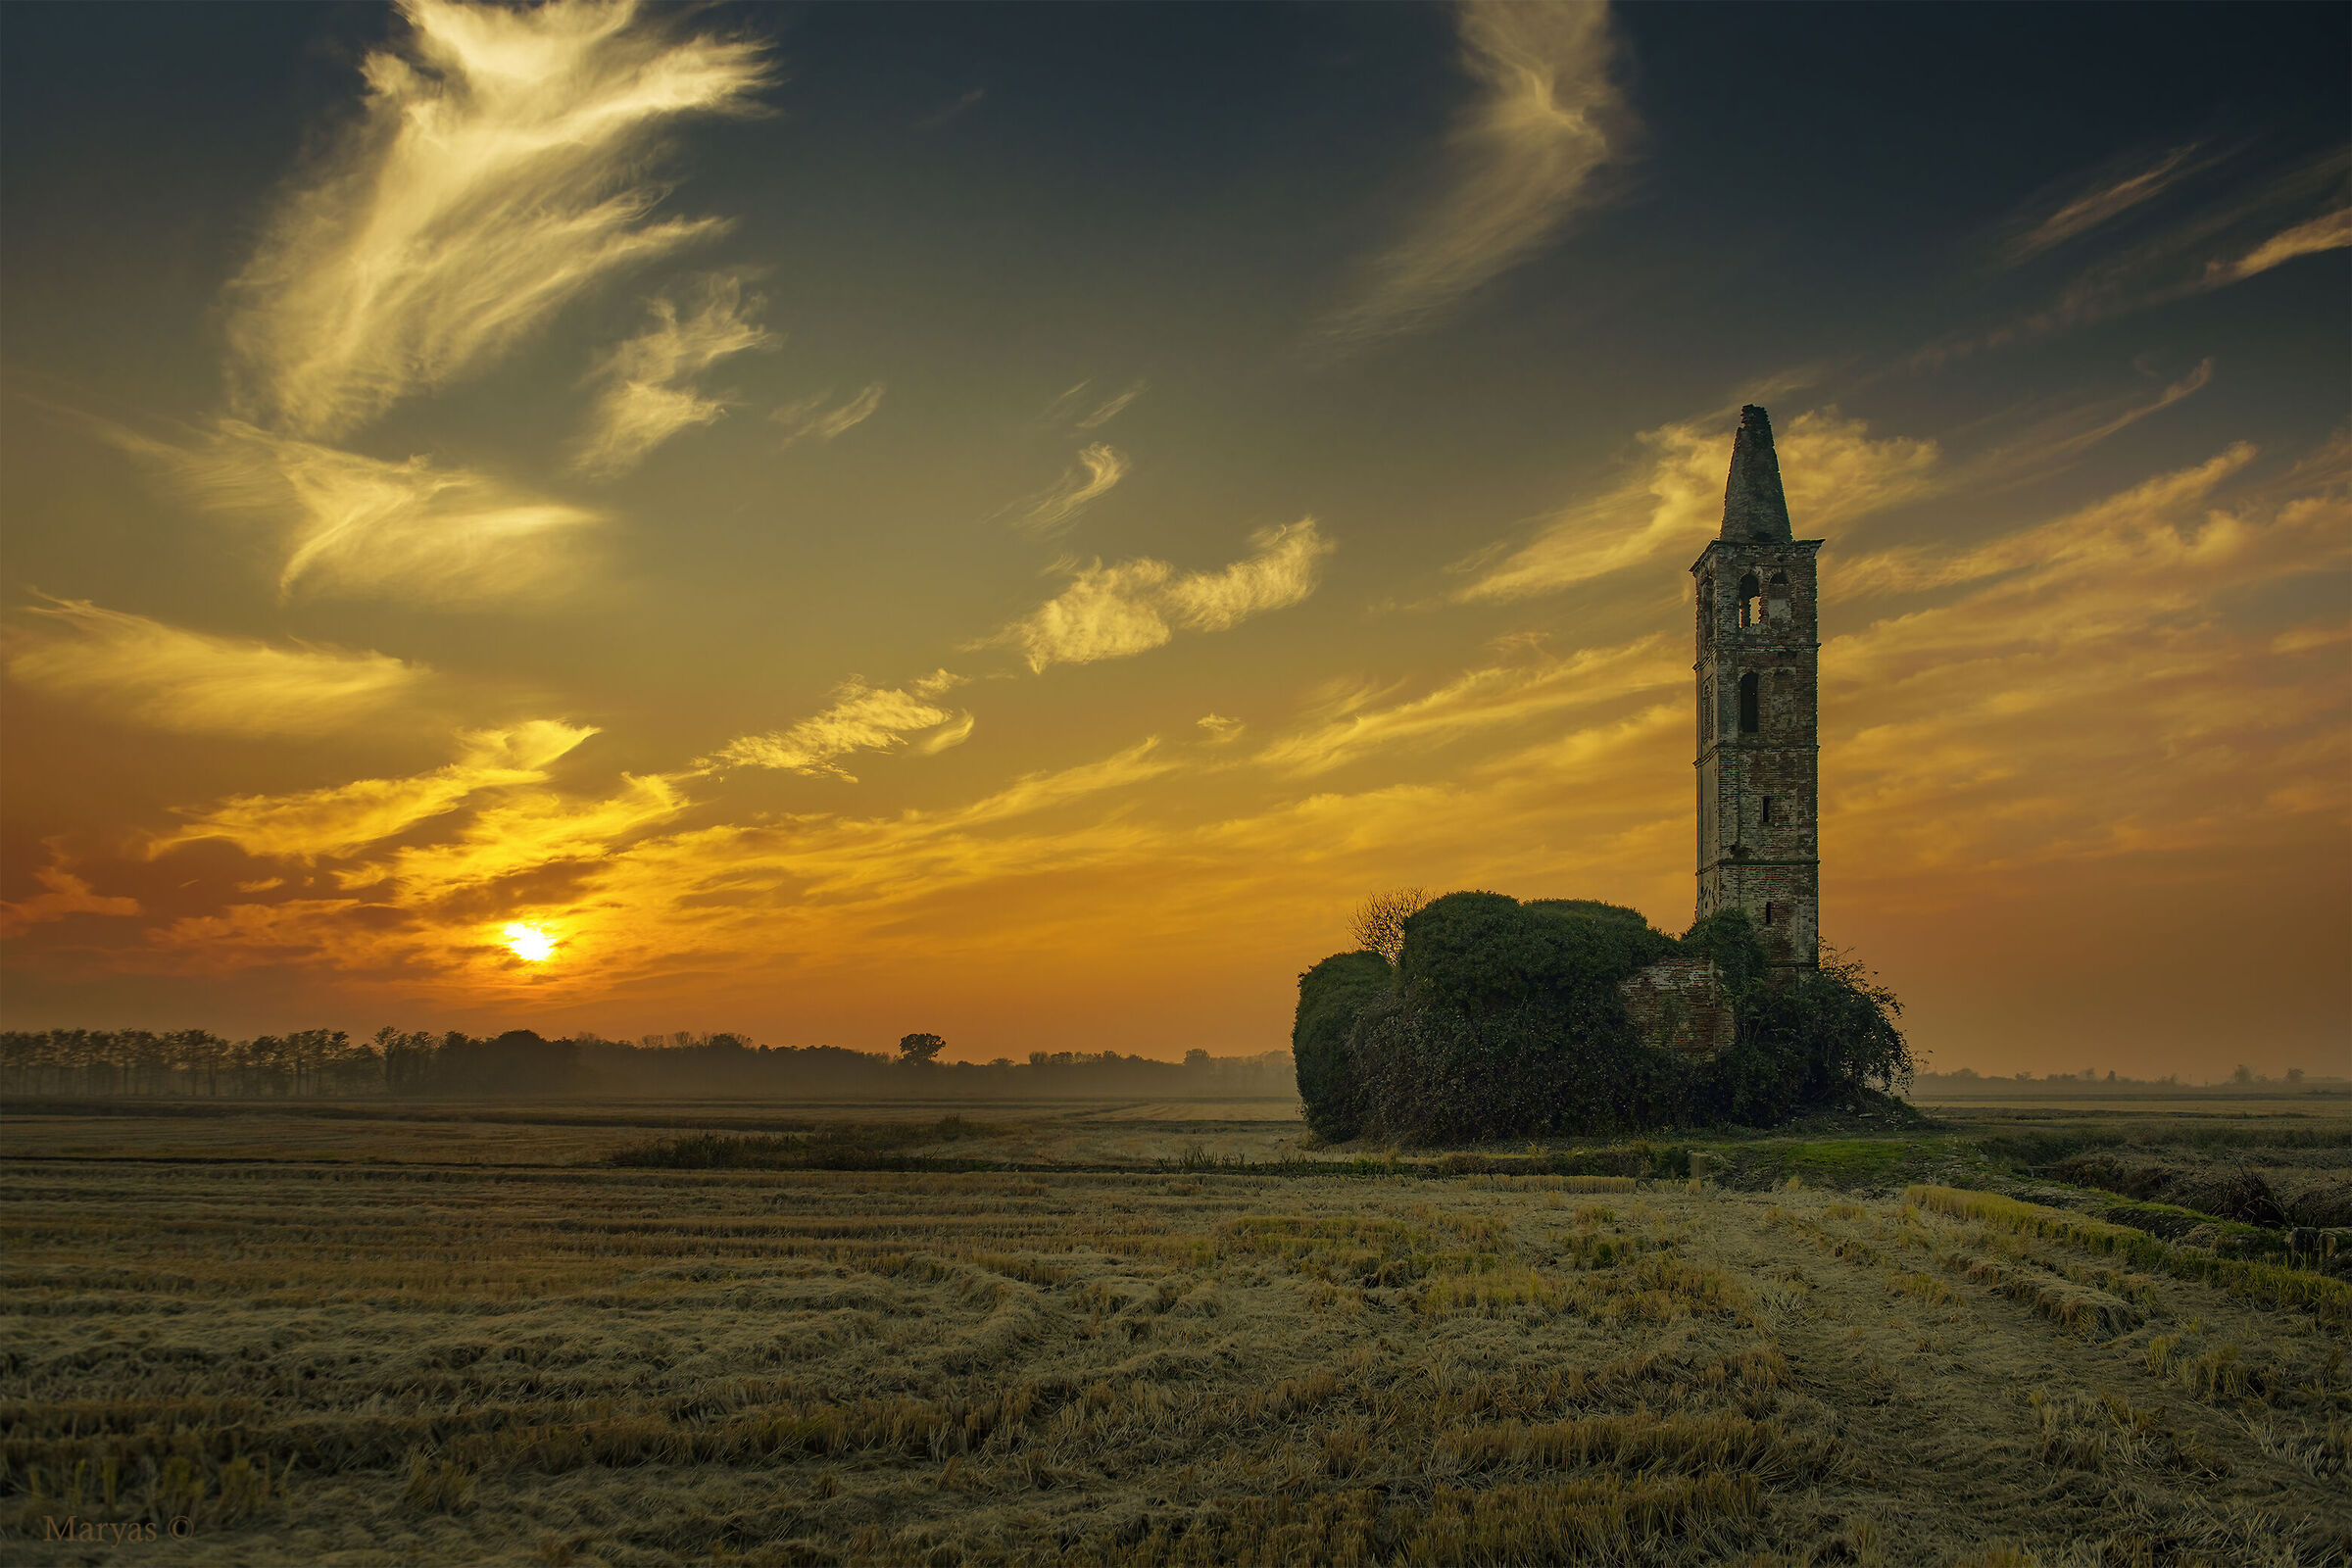 The sunset of a bell tower...